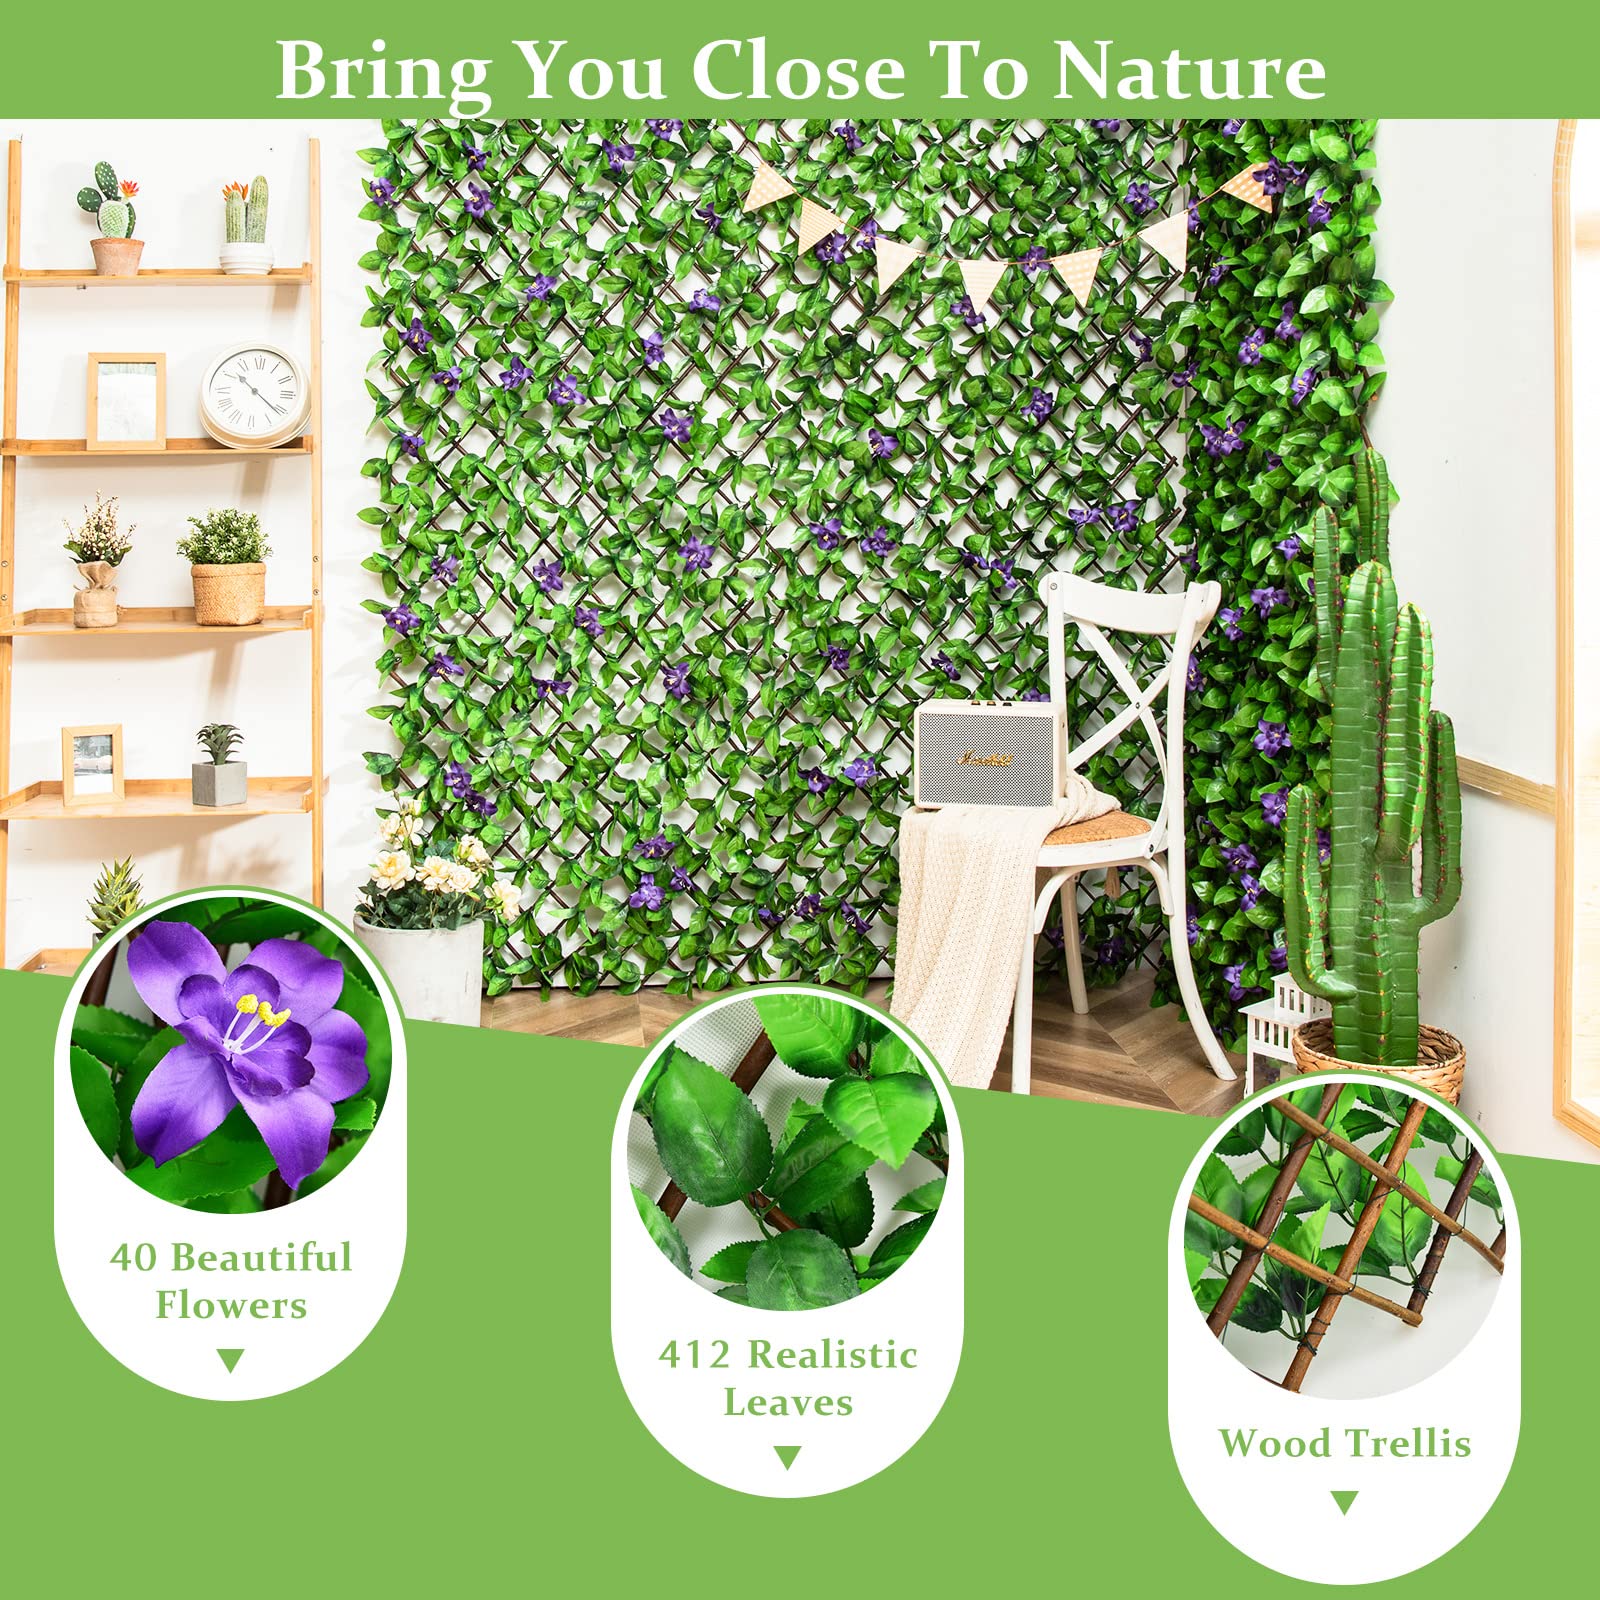 Expandable Fence with Leaves, 6.5ft Privacy Screen Decorative Fake Ivy Fencing Panel